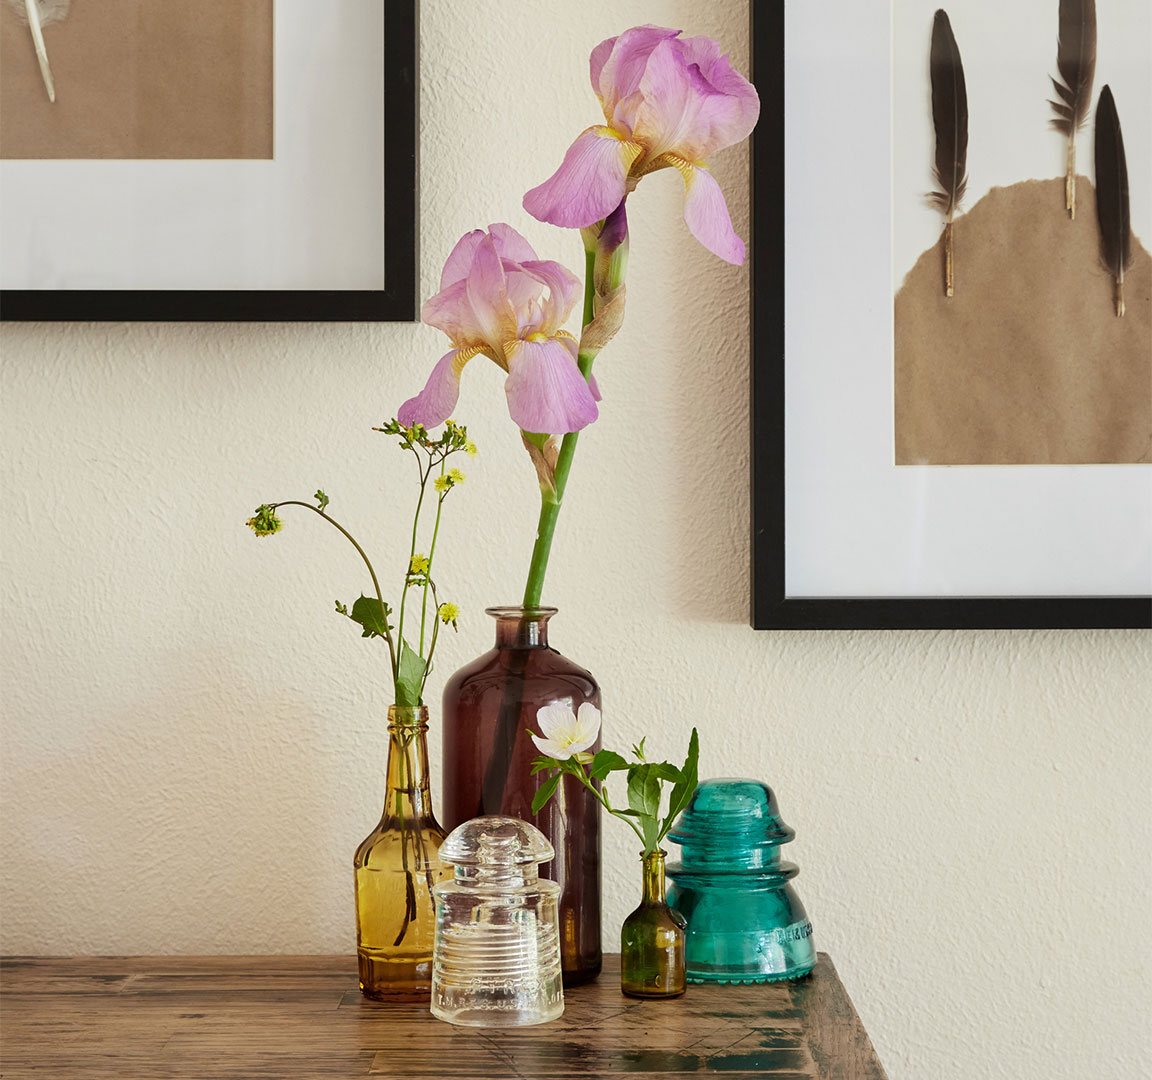 Antique glass bottles with floral arrangements styled and photographed by still life photographer Kate Benson.